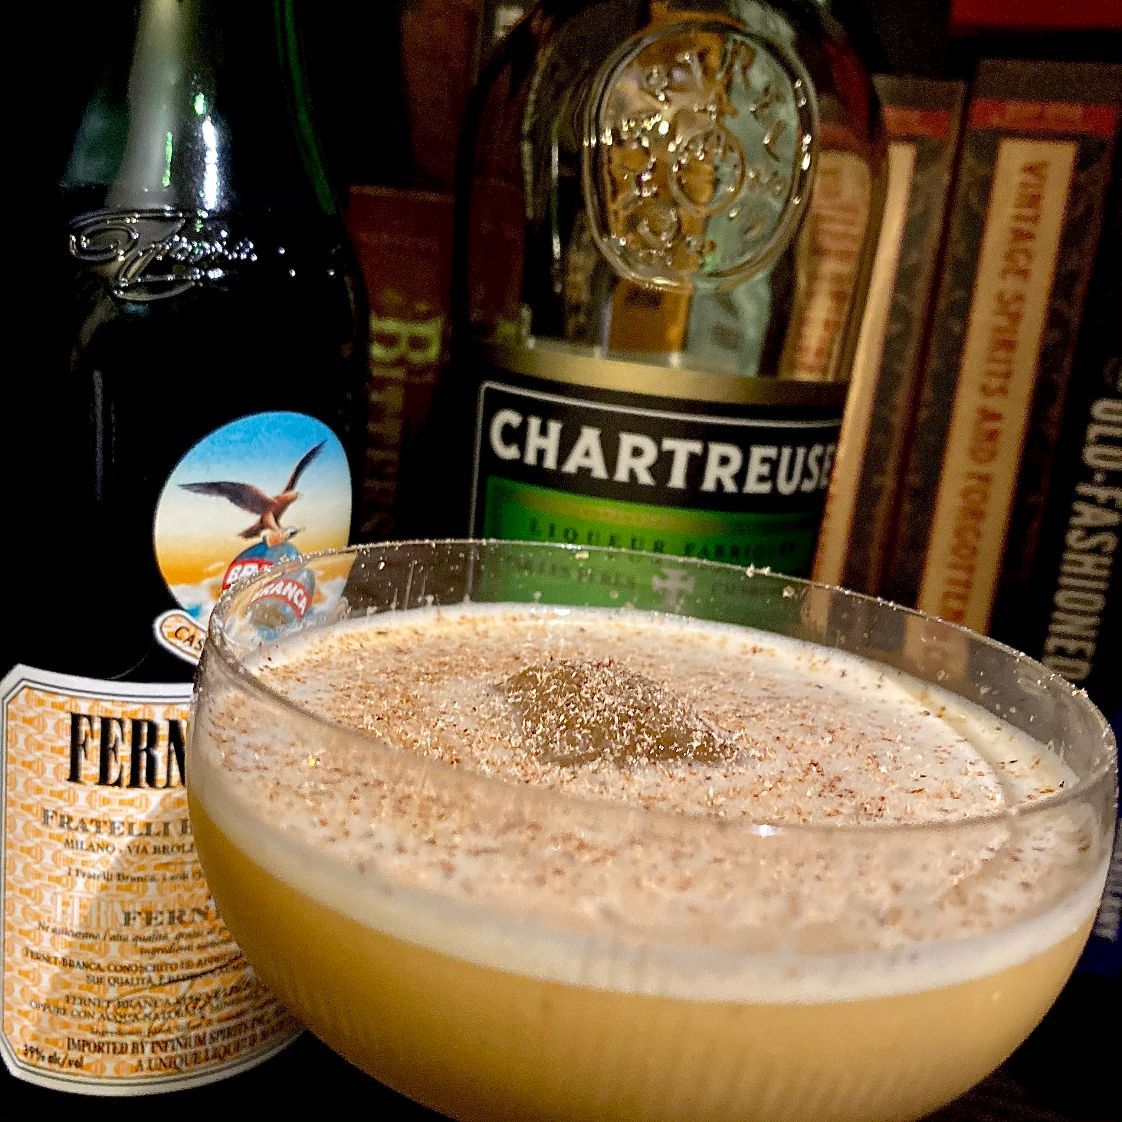 Green Chartreuse and Fernet are a match made in heaven. So much so there’s a shot called Fertreuse that is equal portions of the two, layered one on top of the other. I add egg and sugar with a bit of a shake and voila, The Elf Word, a perfect holiday elix.